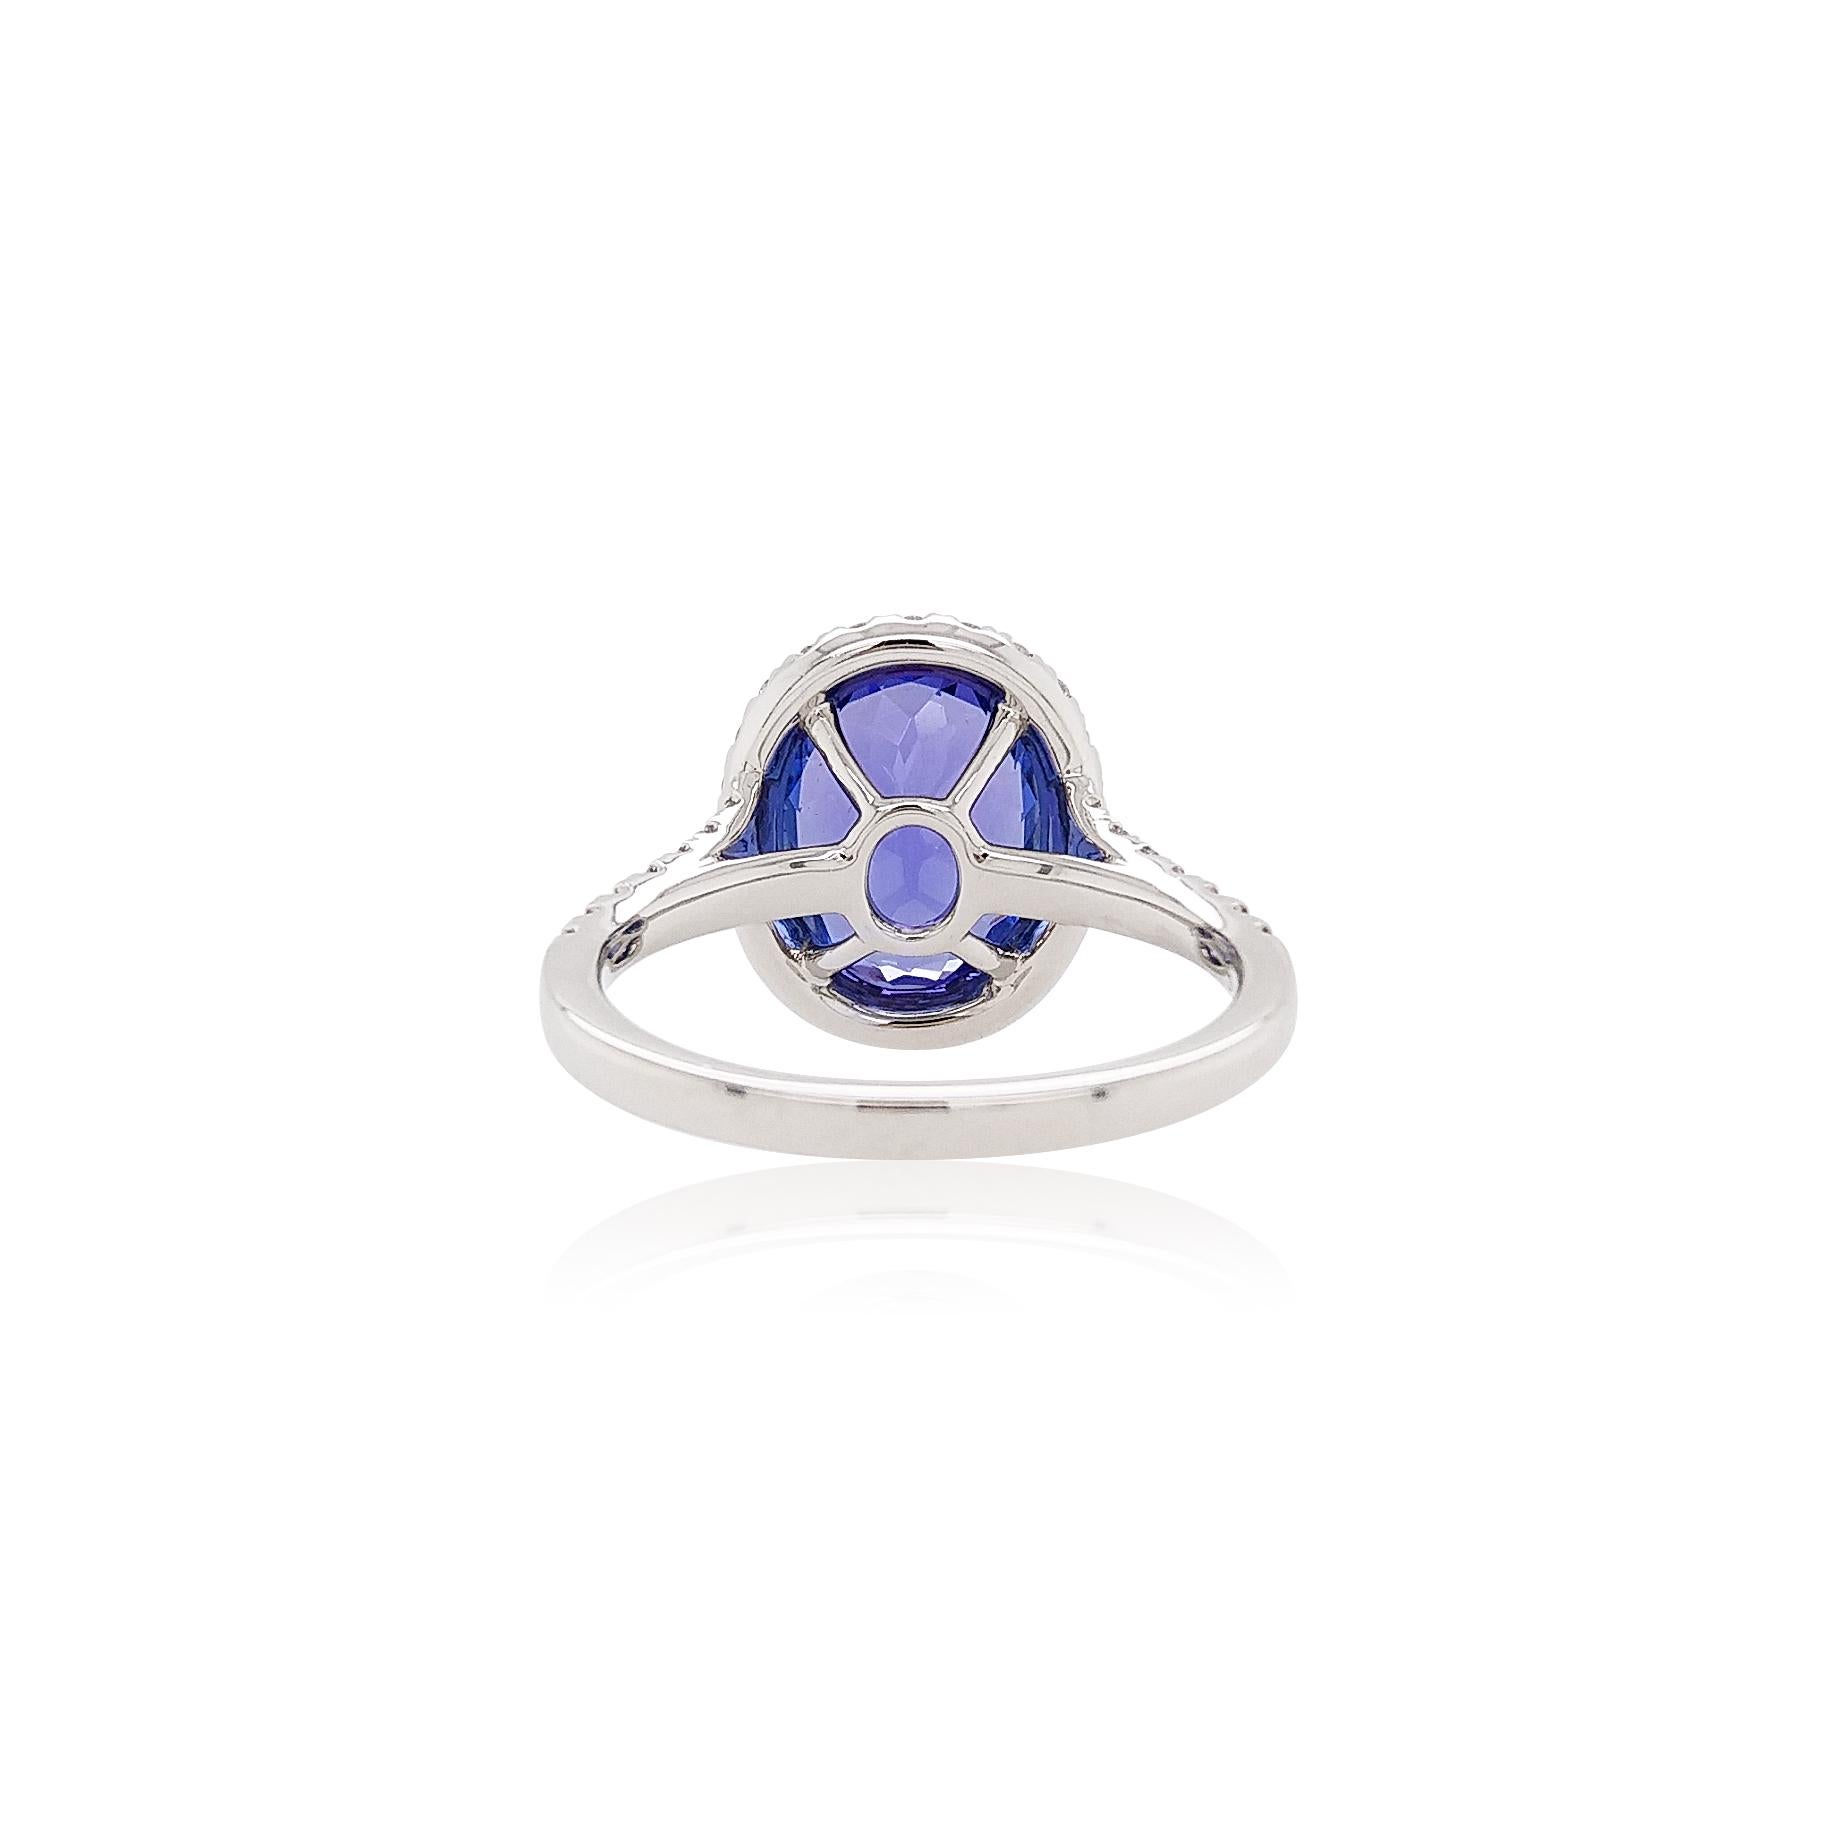 This elegant ring features a lustrous Tanzanite surrounded by a halo of glistening White Diamonds, in a design that is fast becoming a modern classic. Set in platinum to enrich the lustre of the Tanzanite and the bright sparkle of the White